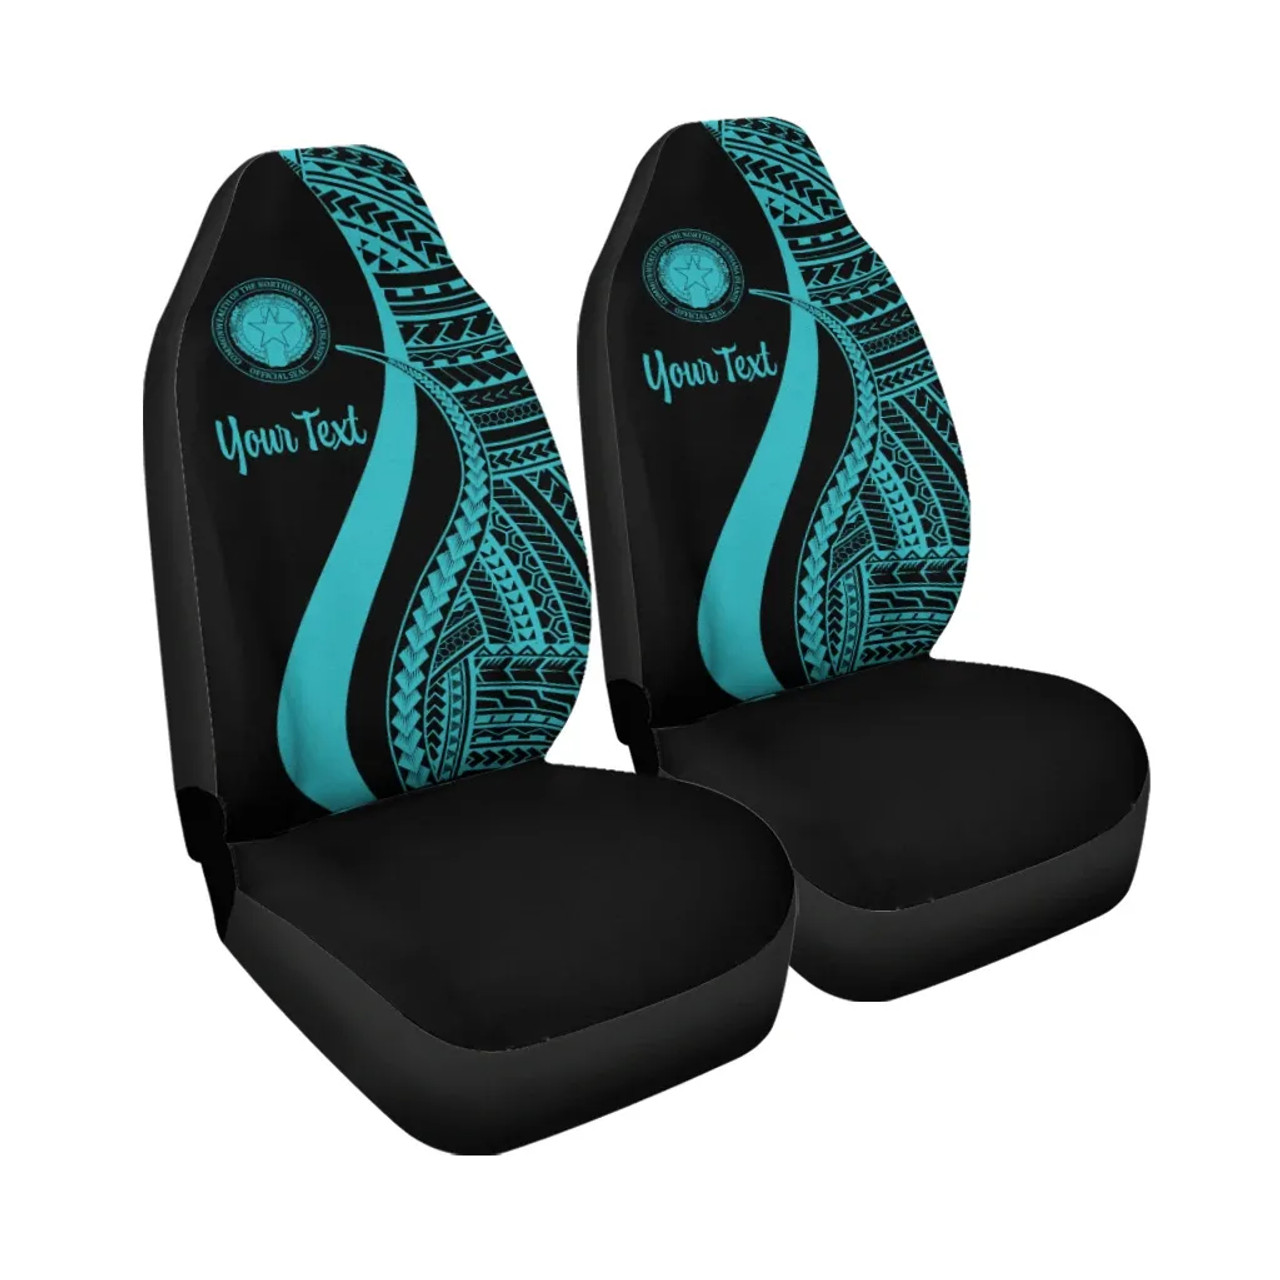 Northern Mariana Islands Custom Personalised Car Seat Covers - Turquoise Polynesian Tentacle Tribal Pattern